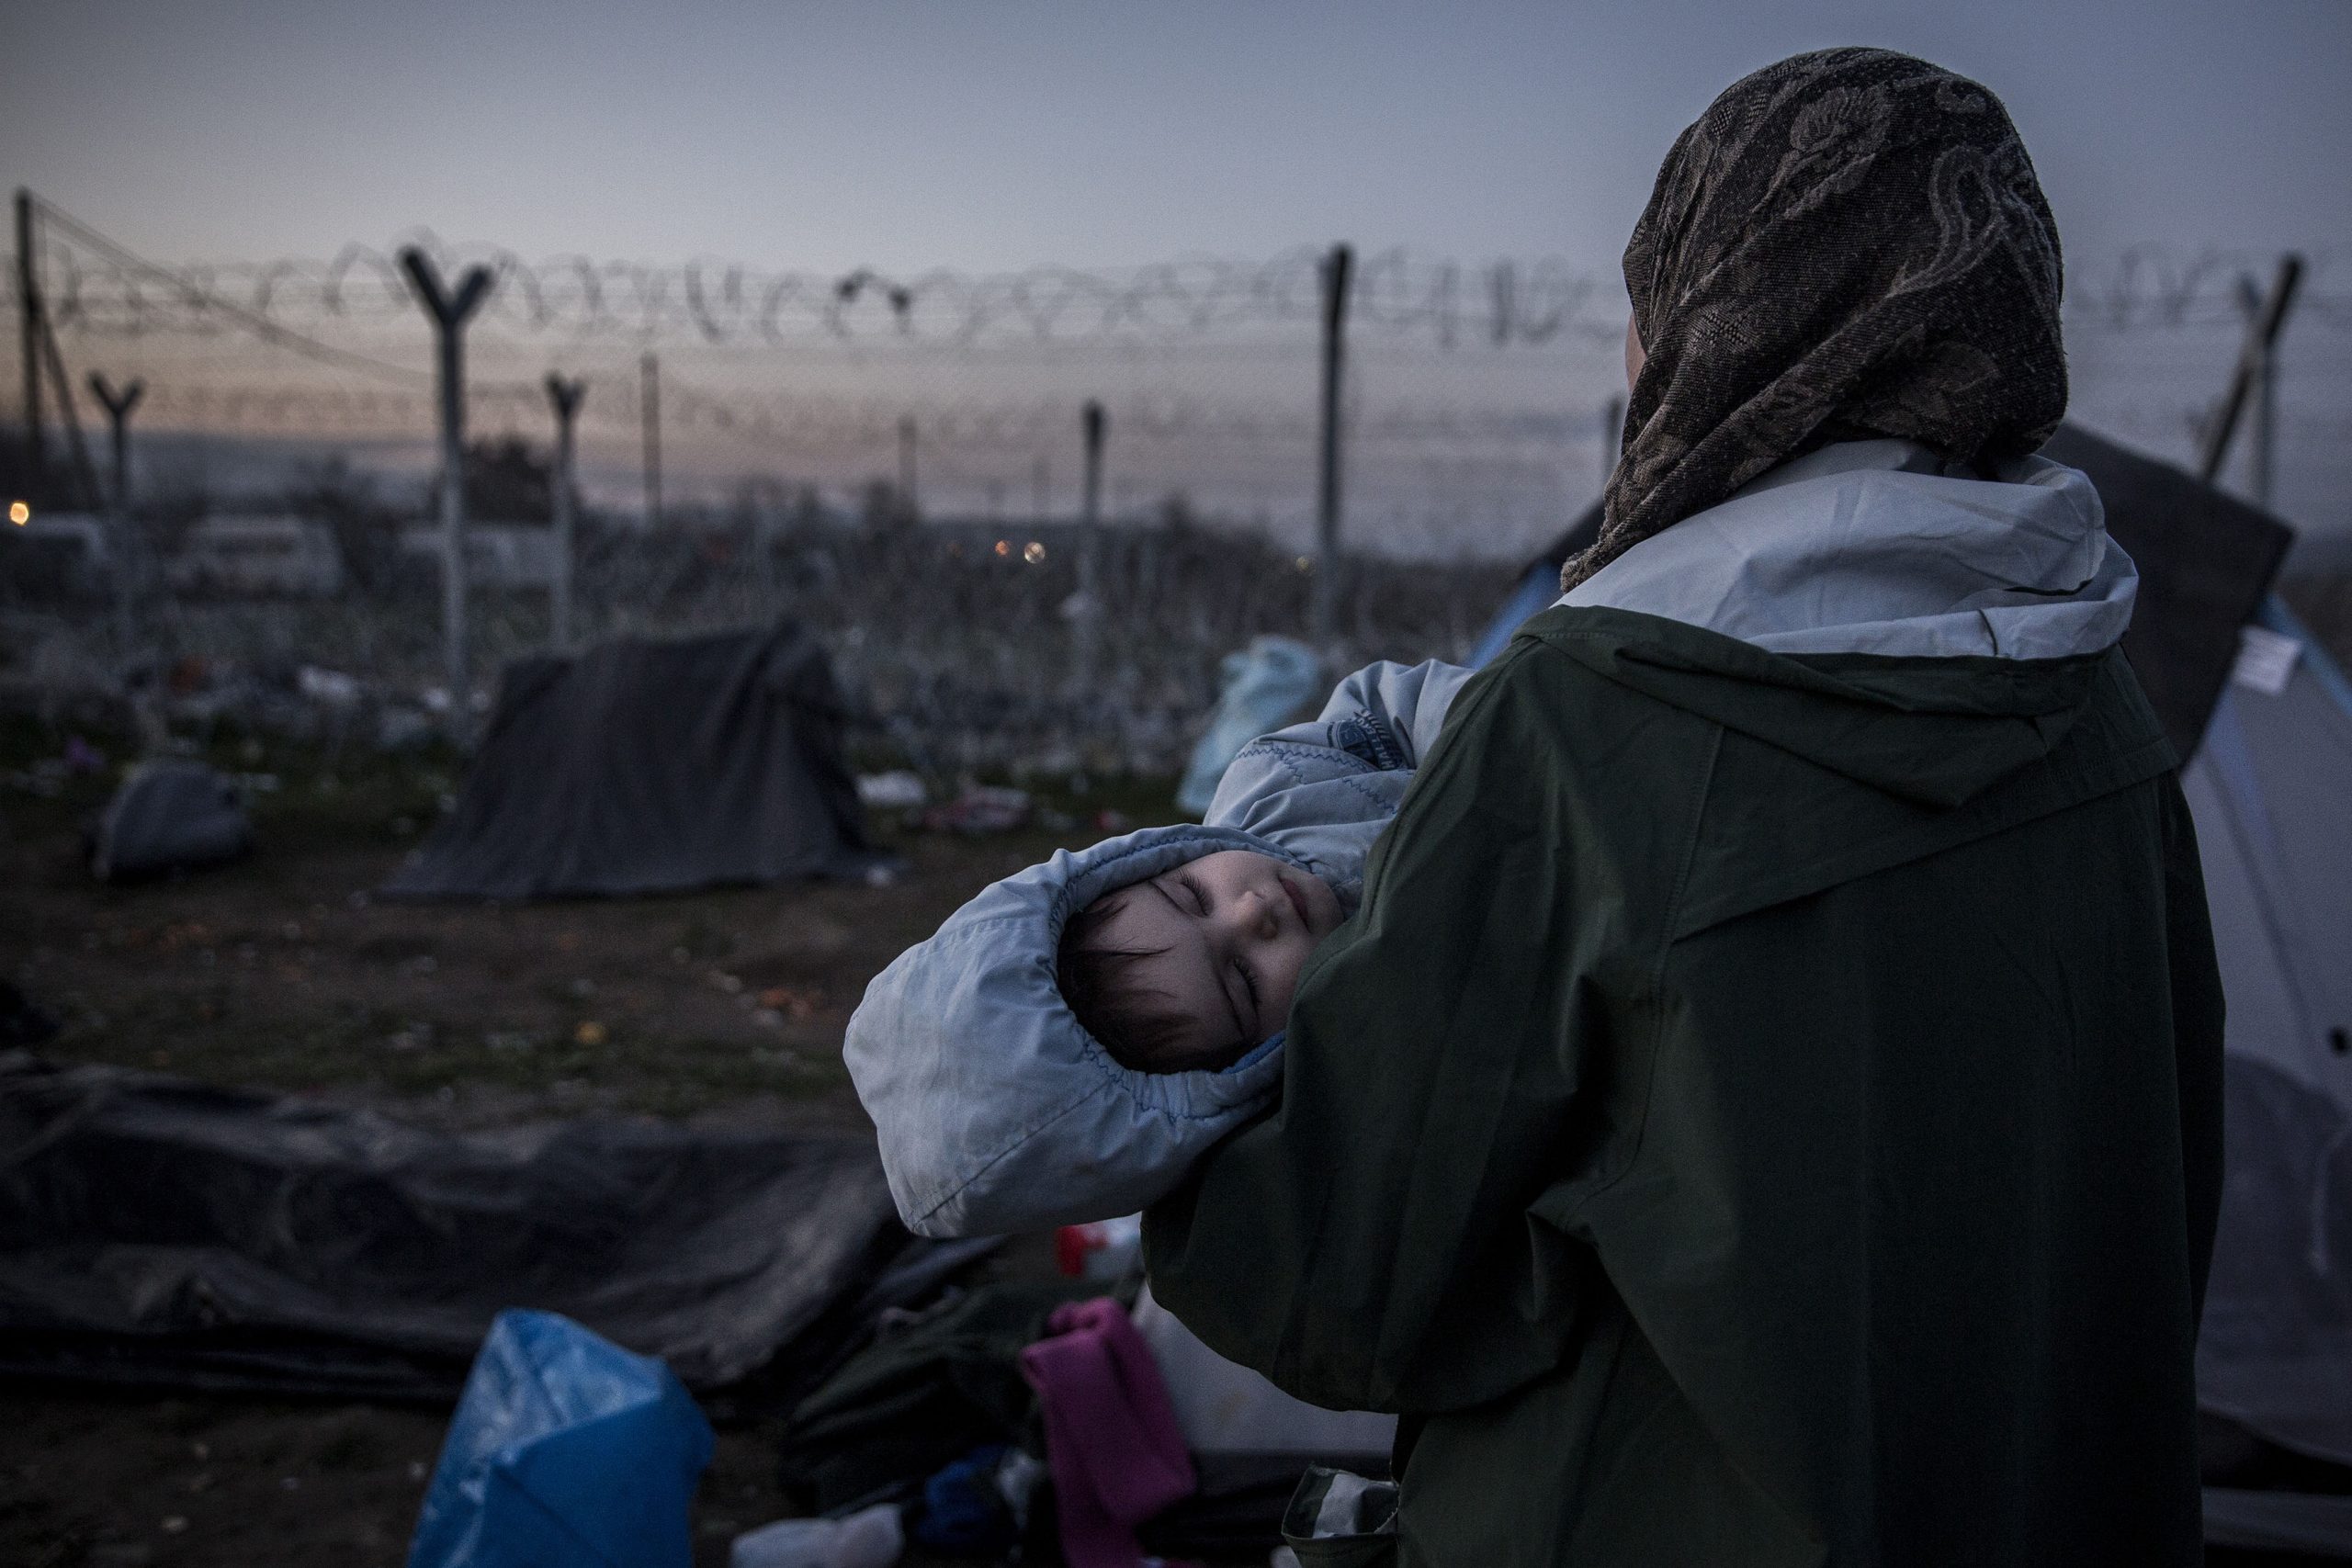 A refugee carry her son in her arms looking at the fence separating Greece and Macedonia. Idomeni, 02/03/2016.